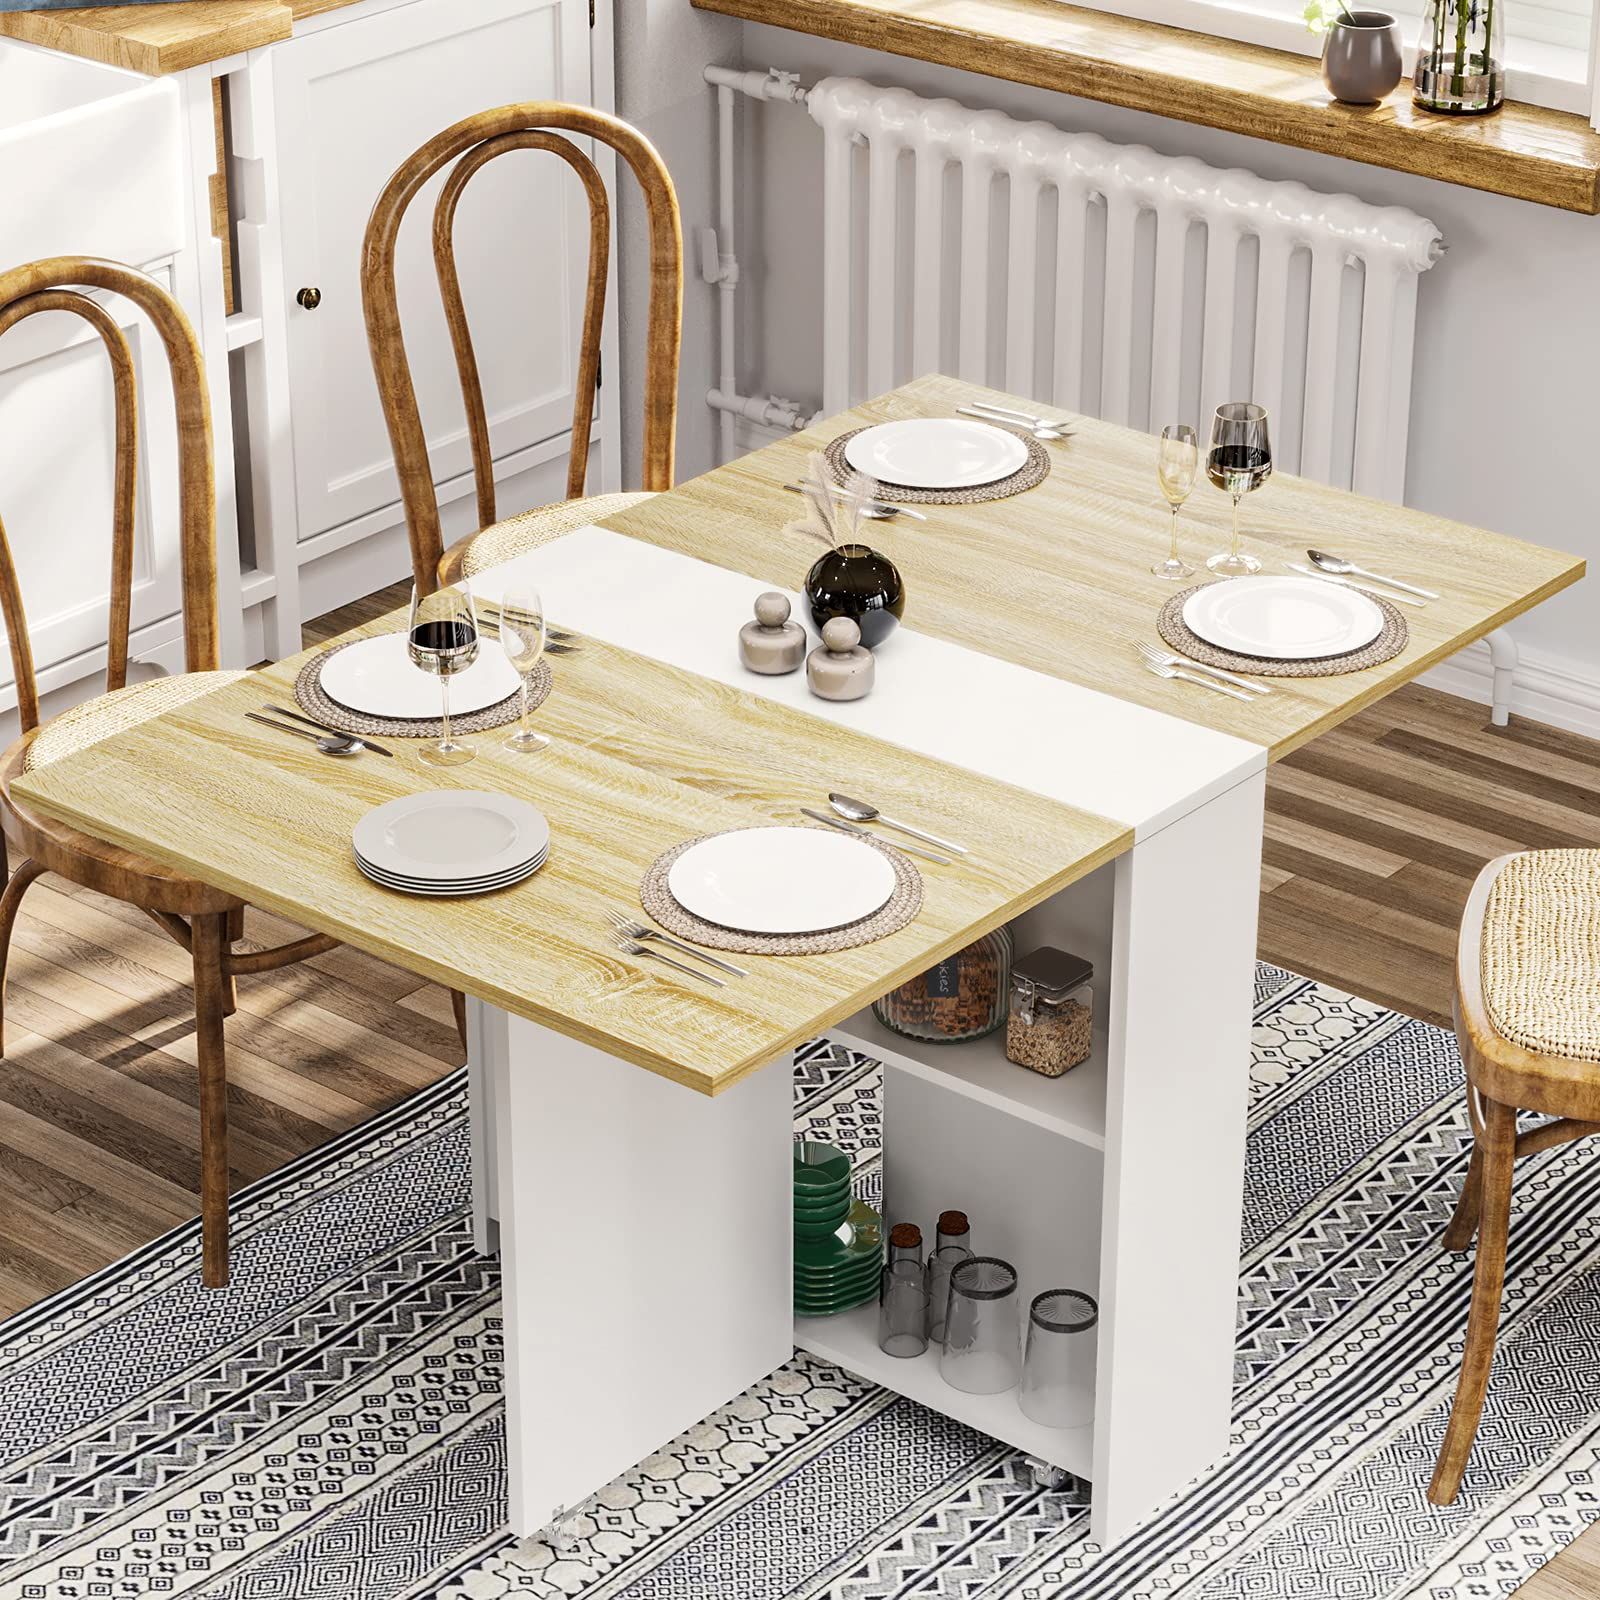 Innovative Space Saving Dining Tables for
Small Spaces